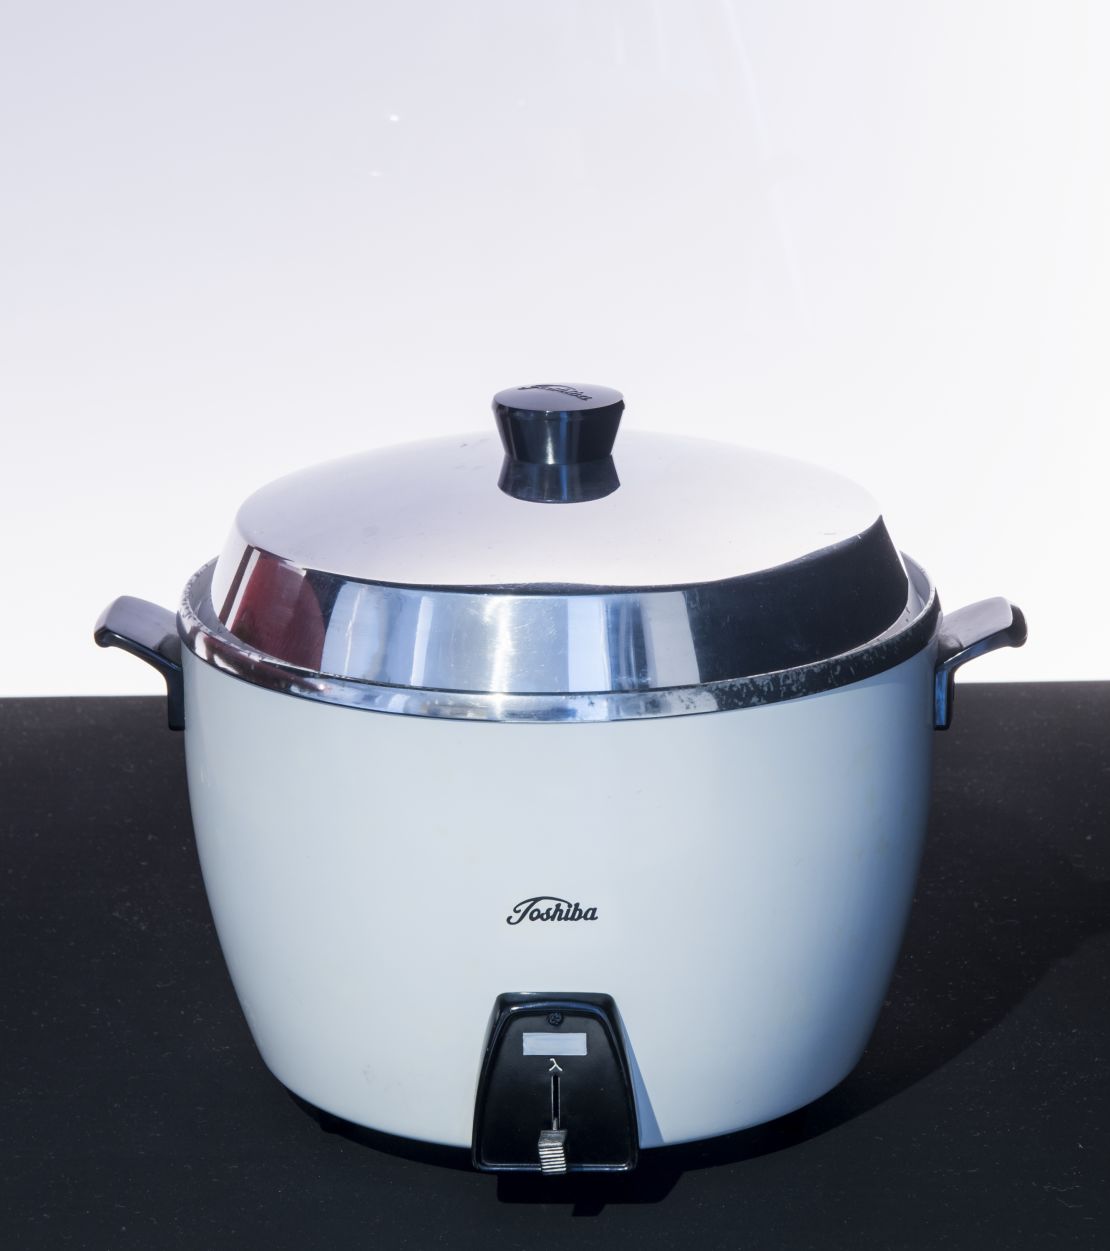 A rice cooker manufactured by Tokyo Shibaura Electric Co., Ltd. (Now Toshiba Corporation)